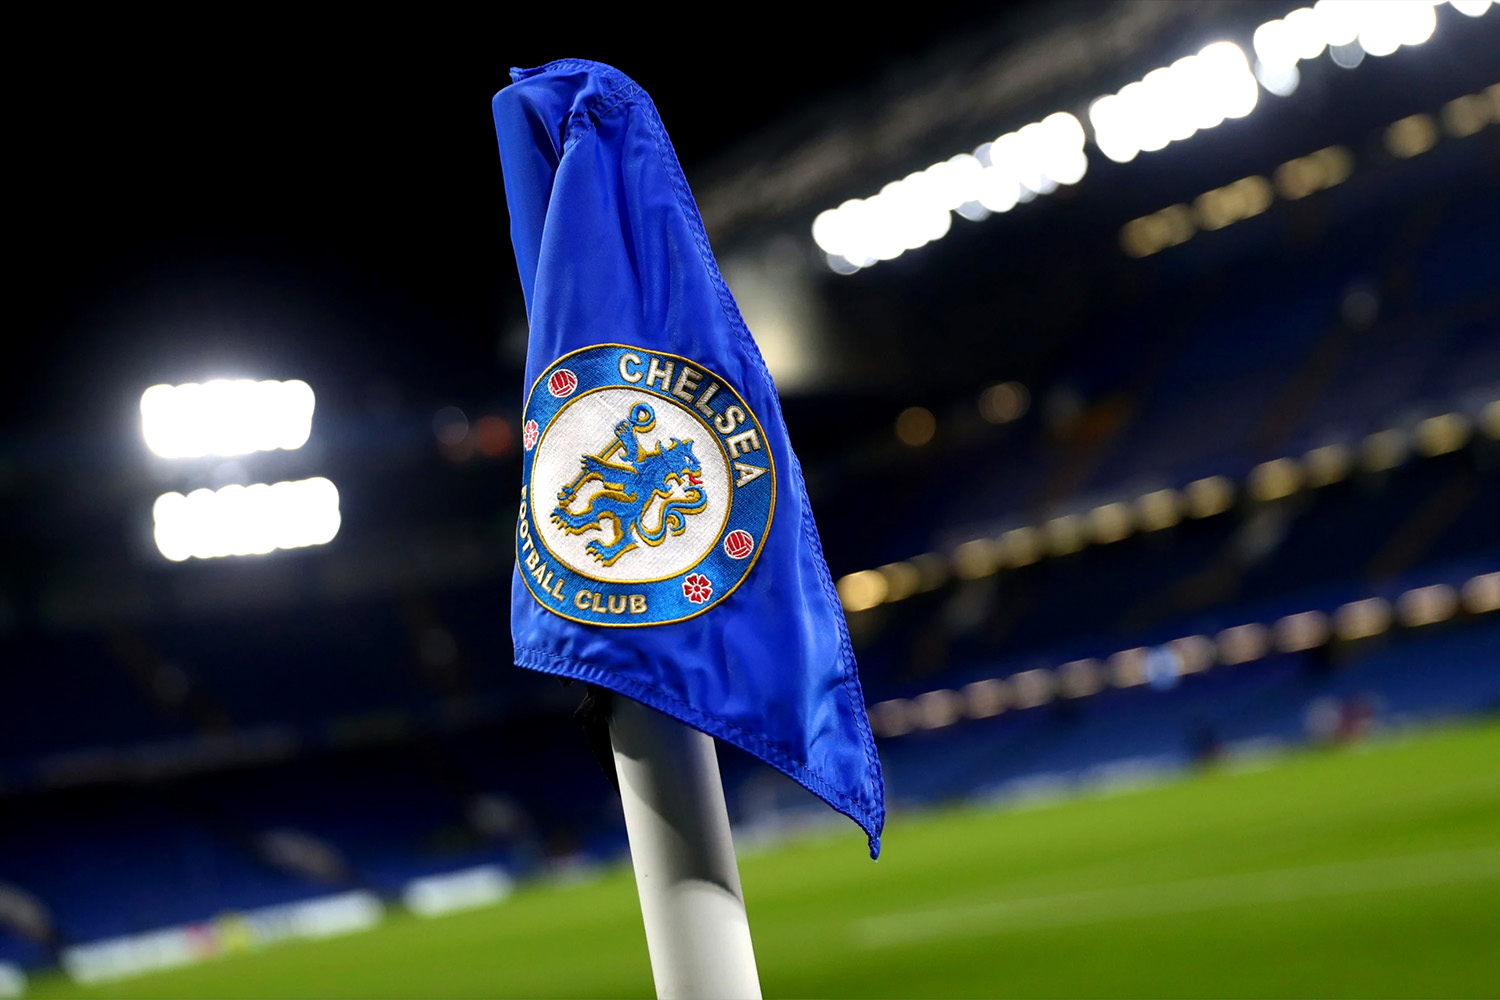 5,000 Chelsea f.c Stock Pictures, Editorial Images and Stock Photos